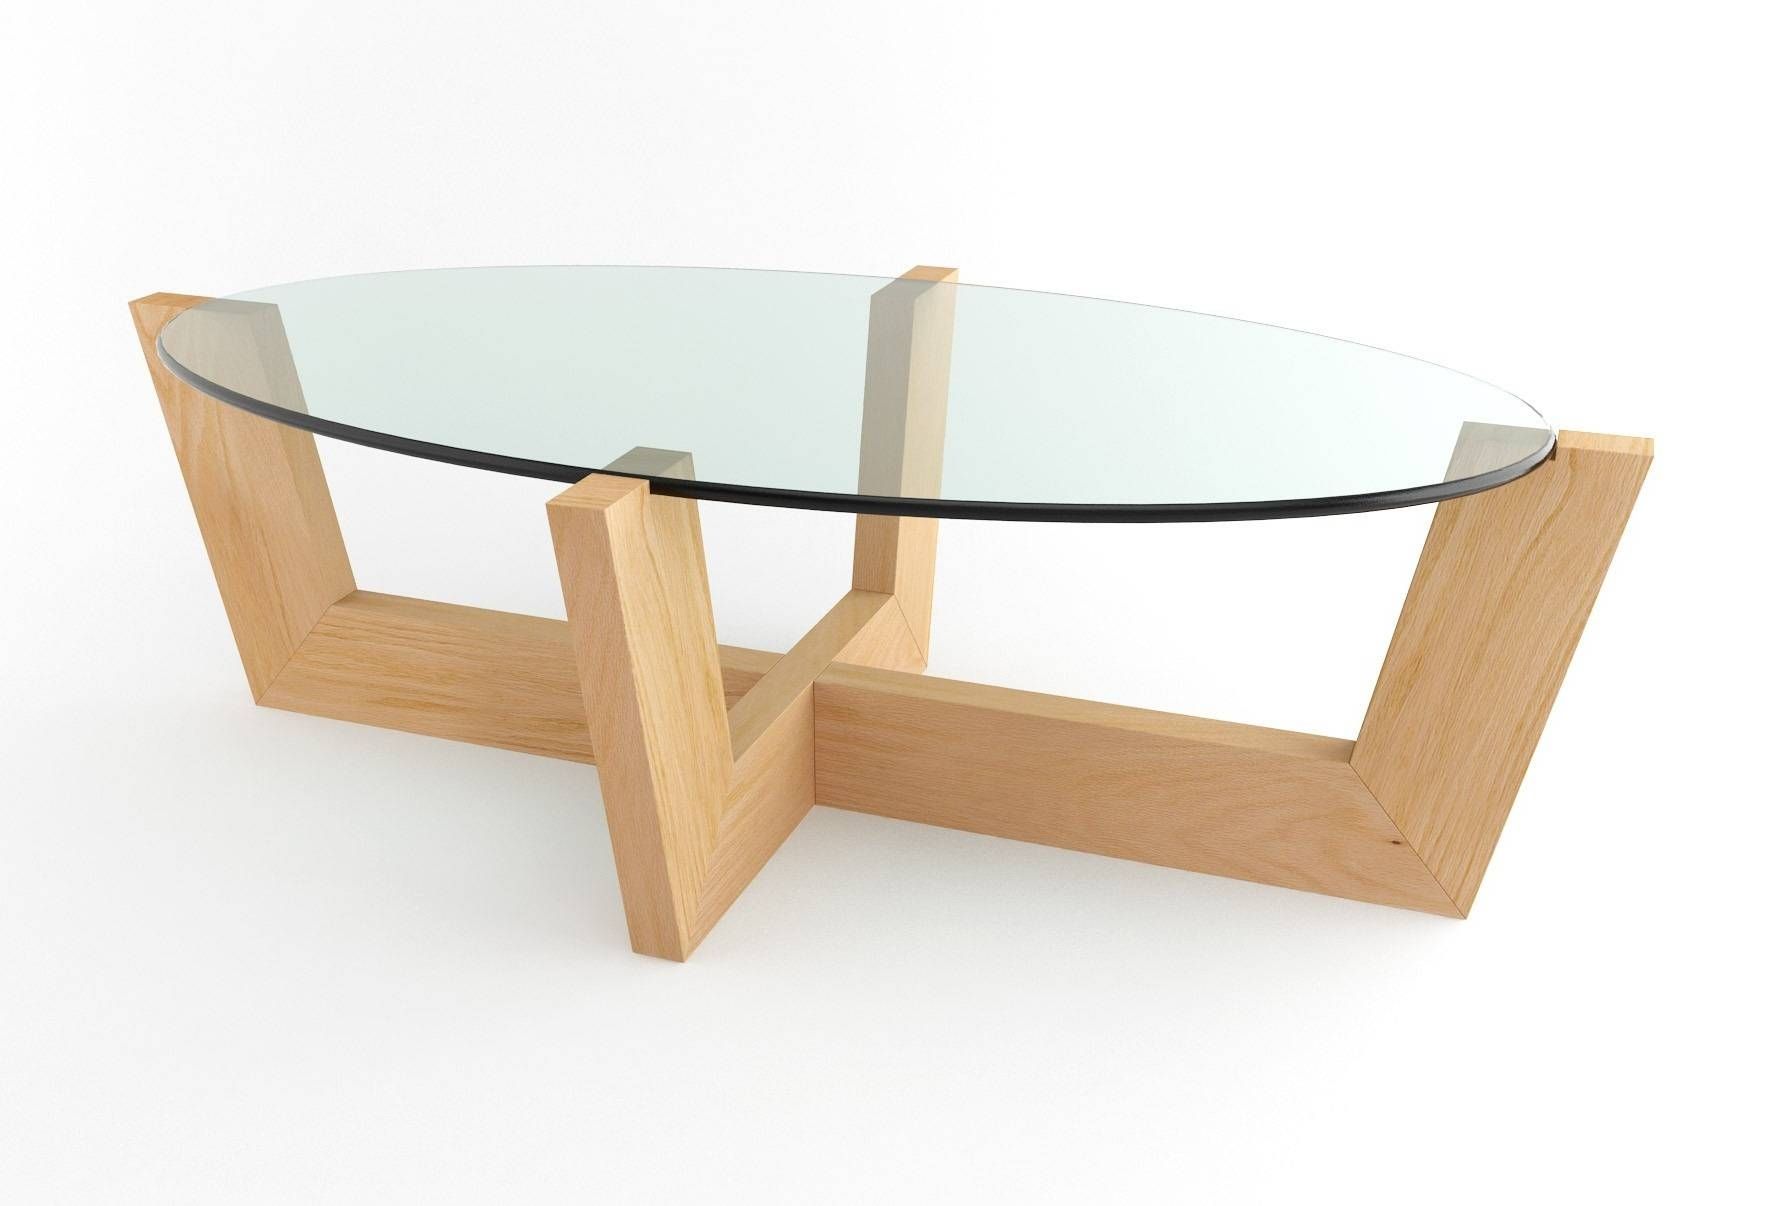 Extraordinary Wooden Coffee Table Designs With Glass Top – Wooden Inside Oval Wooden Coffee Tables (Photo 28 of 30)